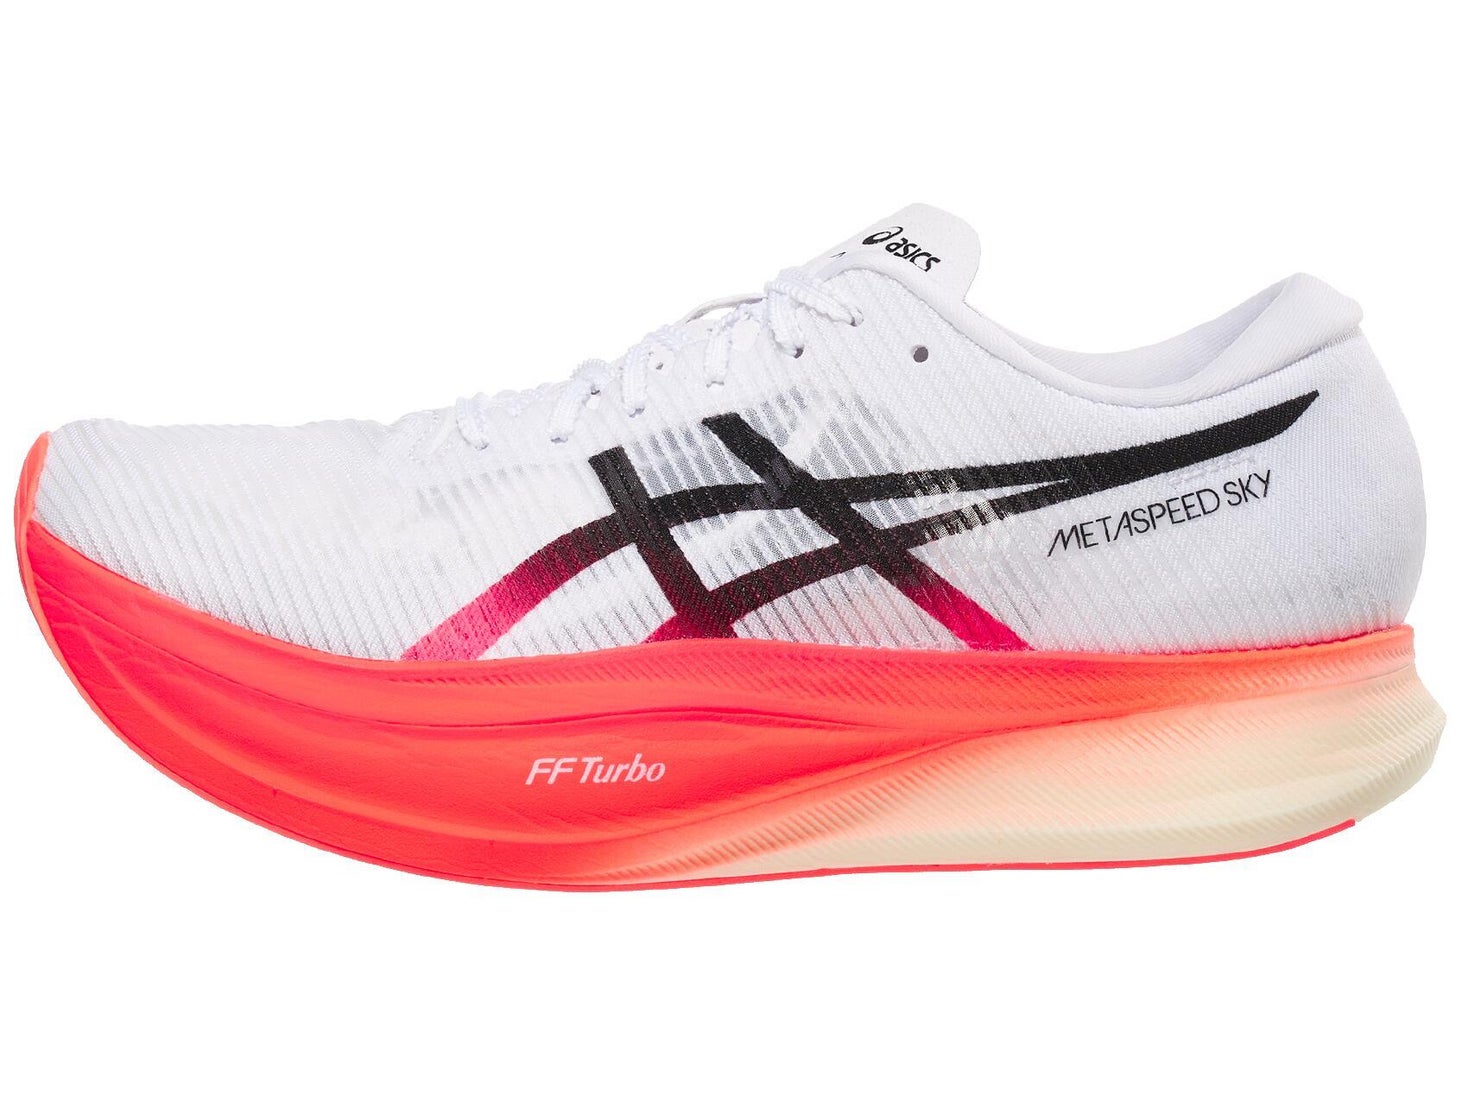 ASICS Metaspeed Sky+ red and white color